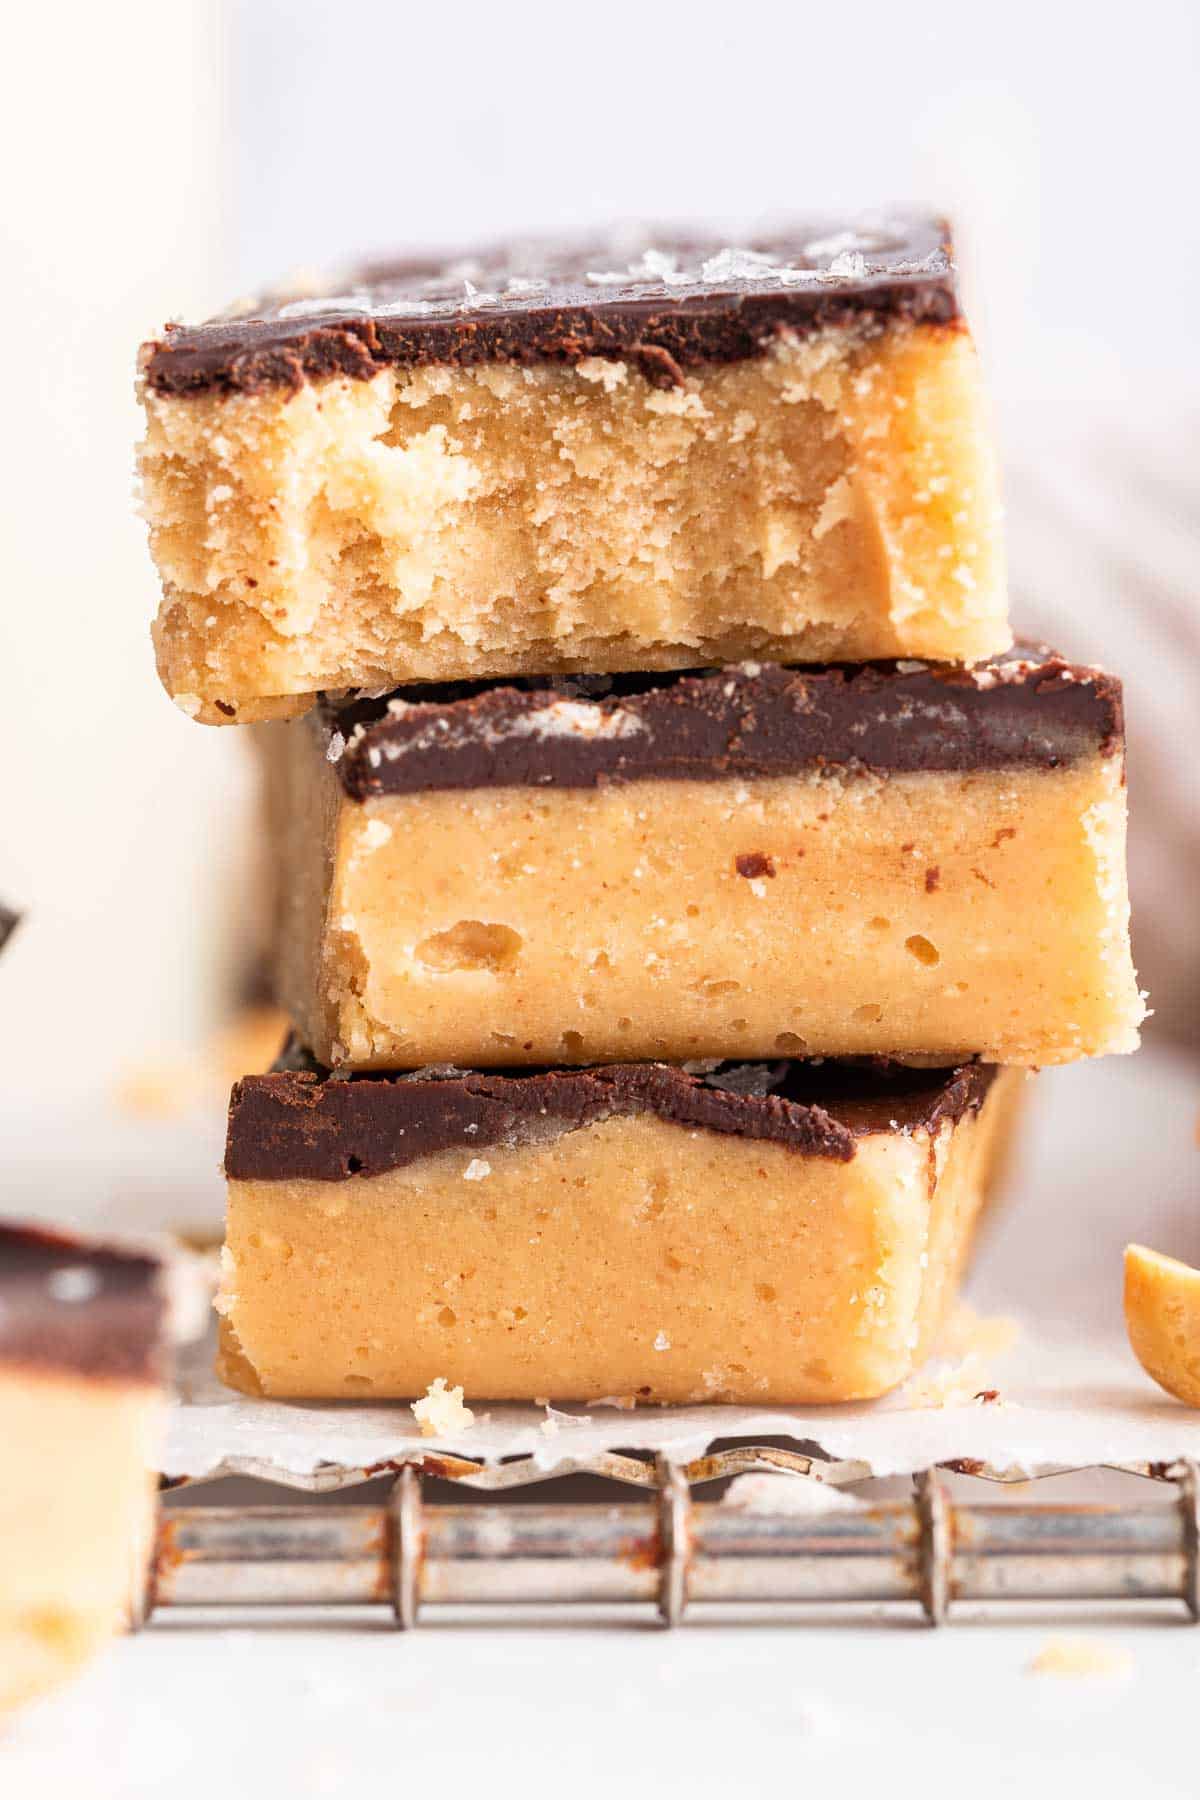 Stack of no bake peanut butter bars with chocolate topping.